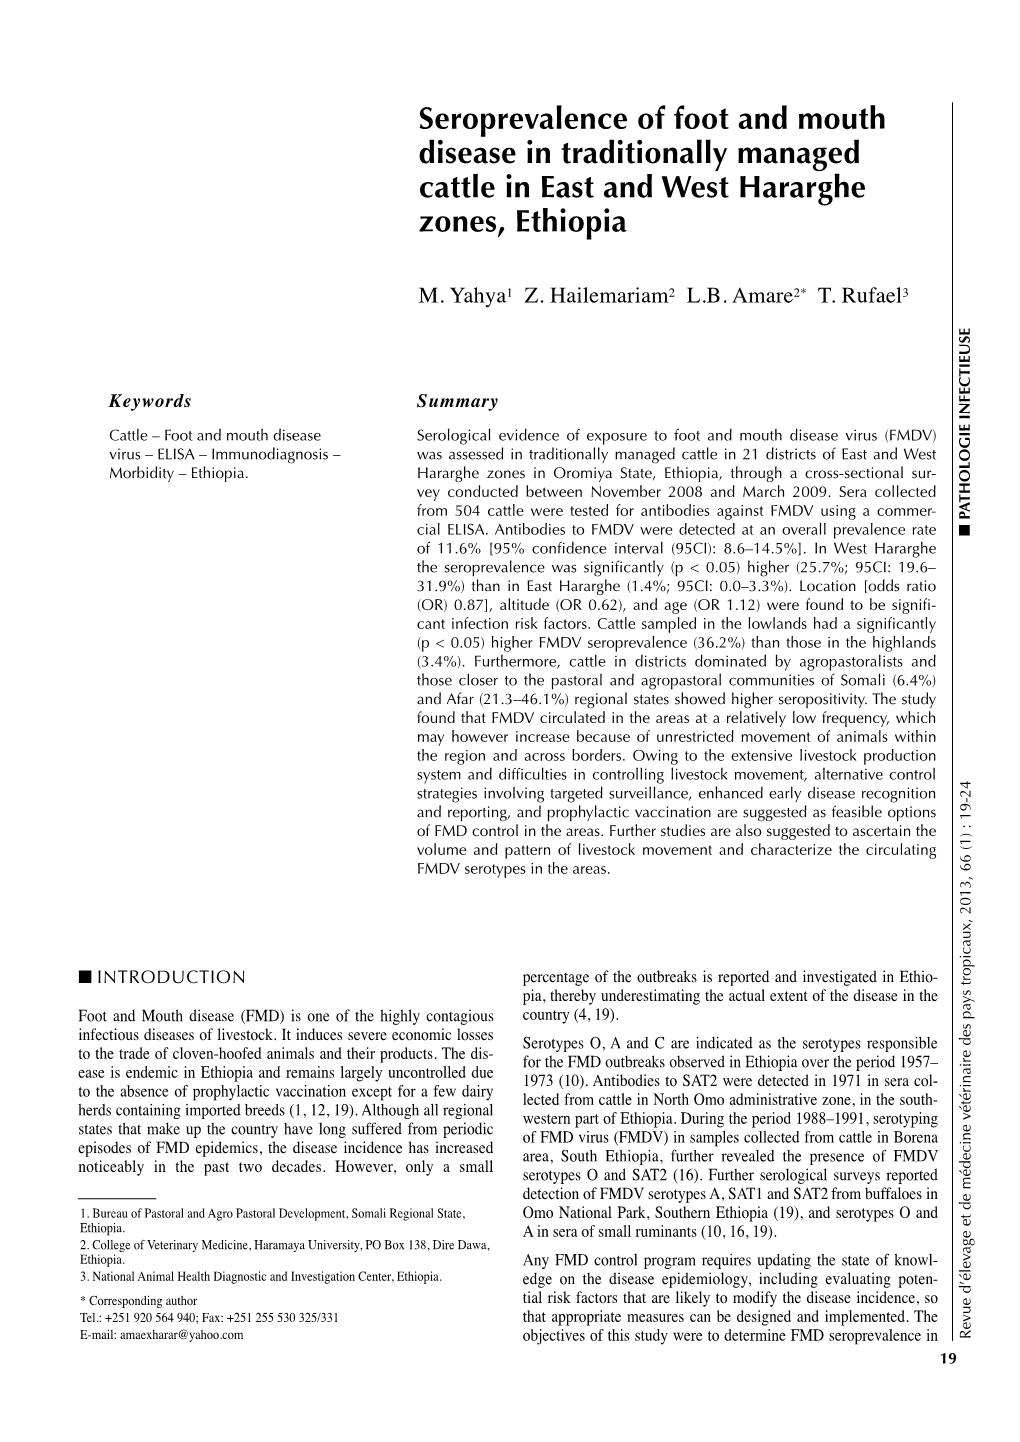 Seroprevalence of Foot and Mouth Disease in Traditionally Managed Cattle in East and West Hararghe Zones, Ethiopia